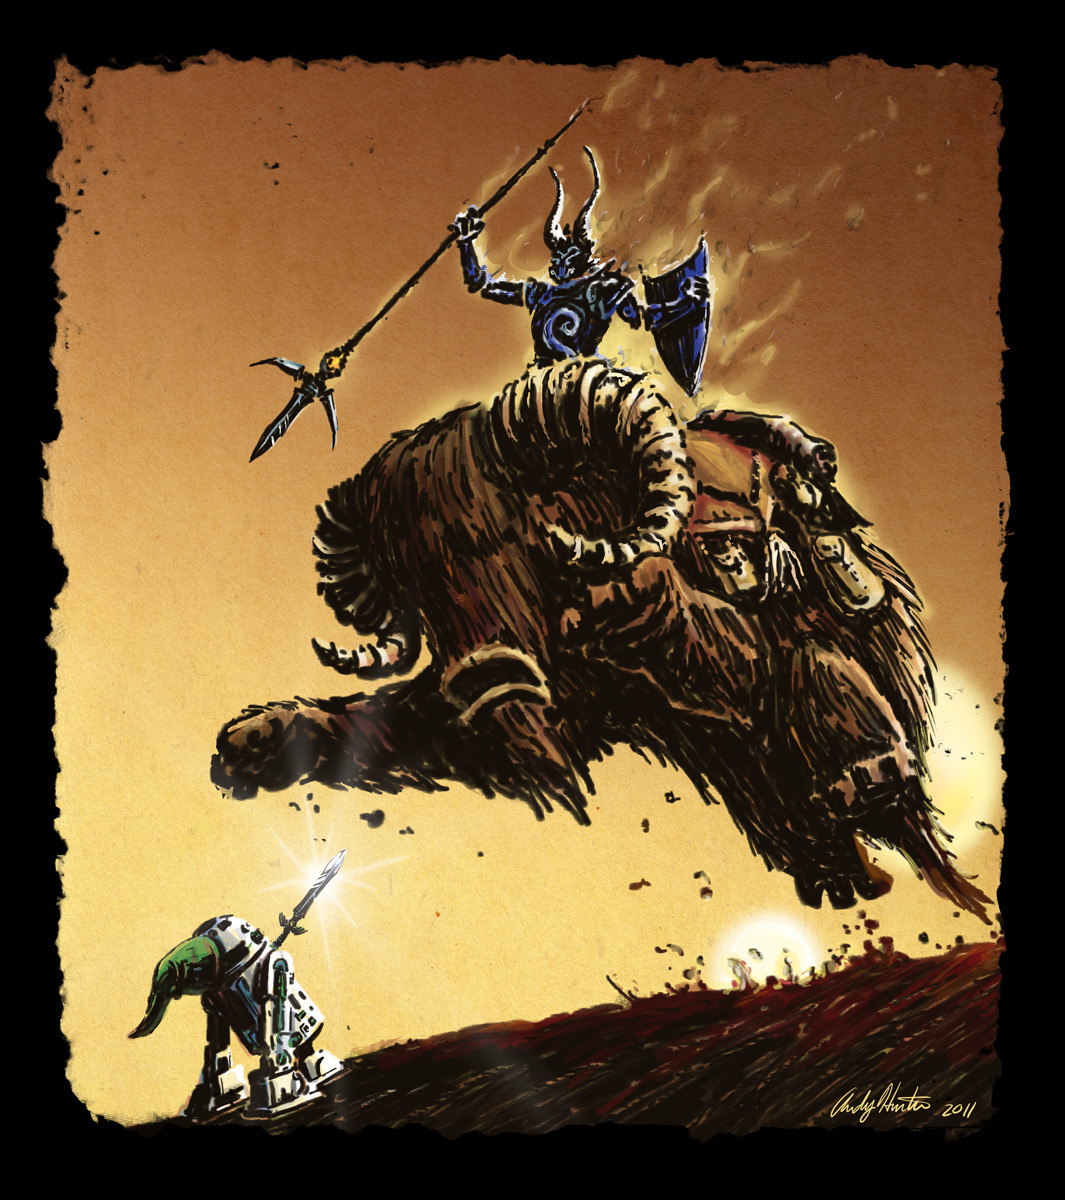 R2D2 Link takes on the forces of Phantom Ganon in this killer Star Wars / Zelda mash up by Andy Hunter. Created for Draw2d2’s current art theme.
Related Rampages: Thunder Cats | Scott Pilgrim (More)
Star Wars / Zelda by Andy Hunter (deviantART)...